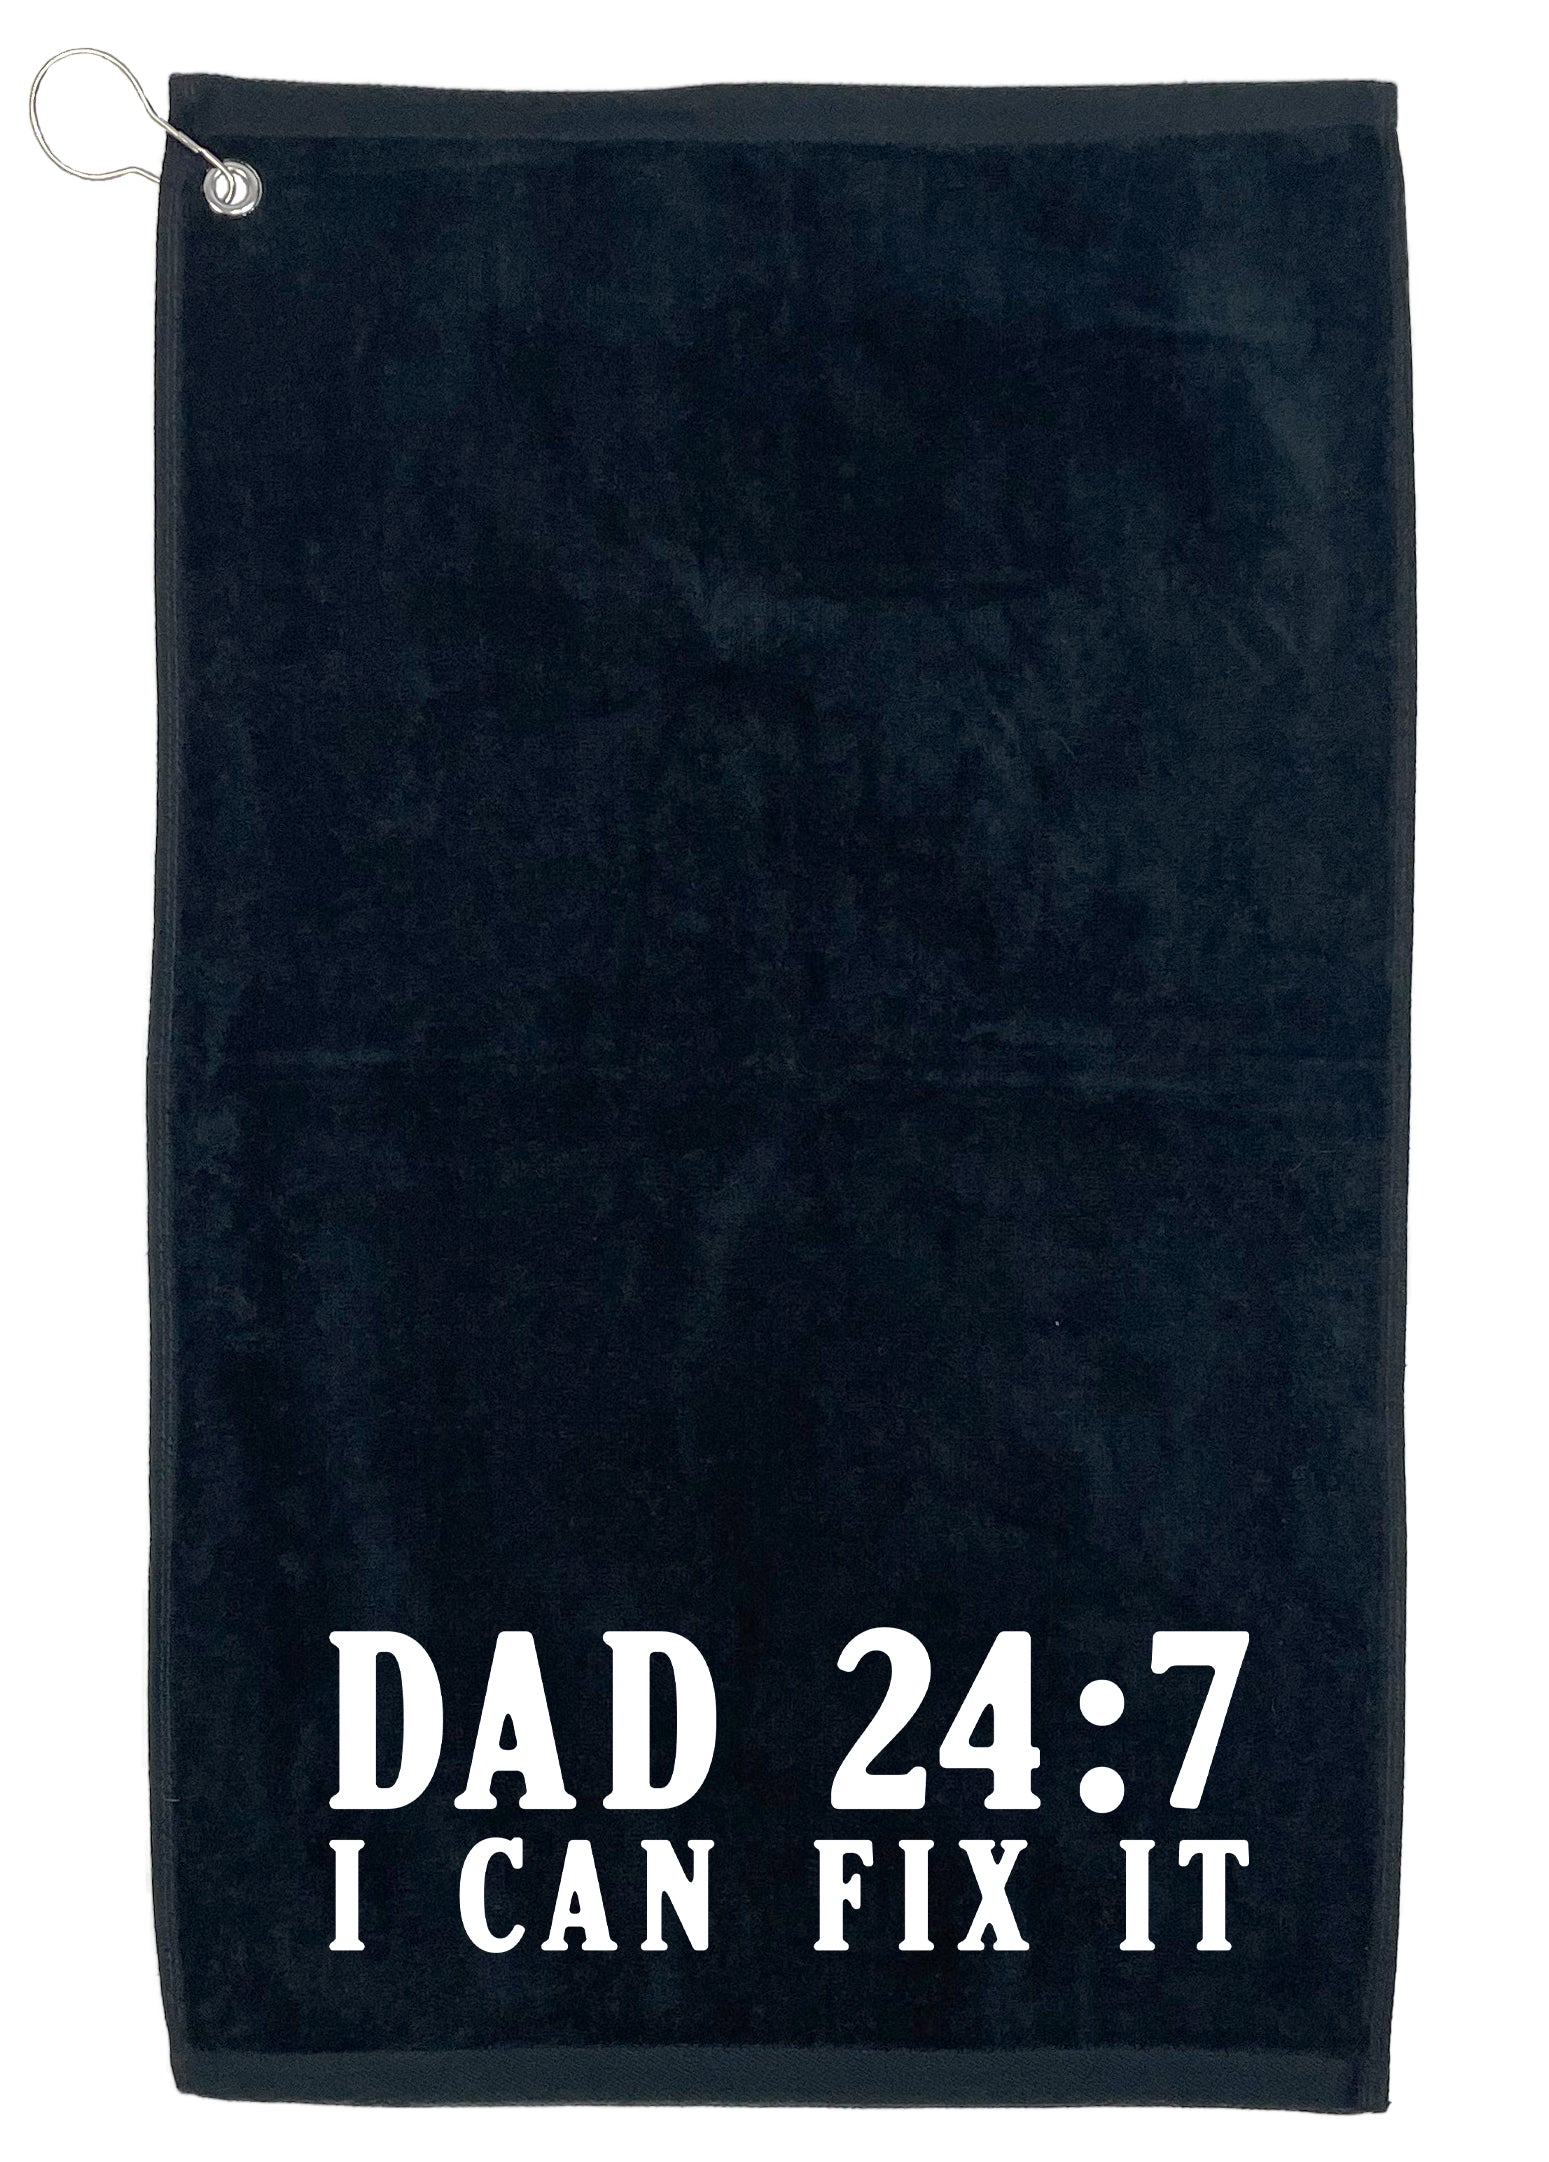 Dad 24:7 I Can Fix it. Golf Towel - Funny T Shirts & Graphic Tees